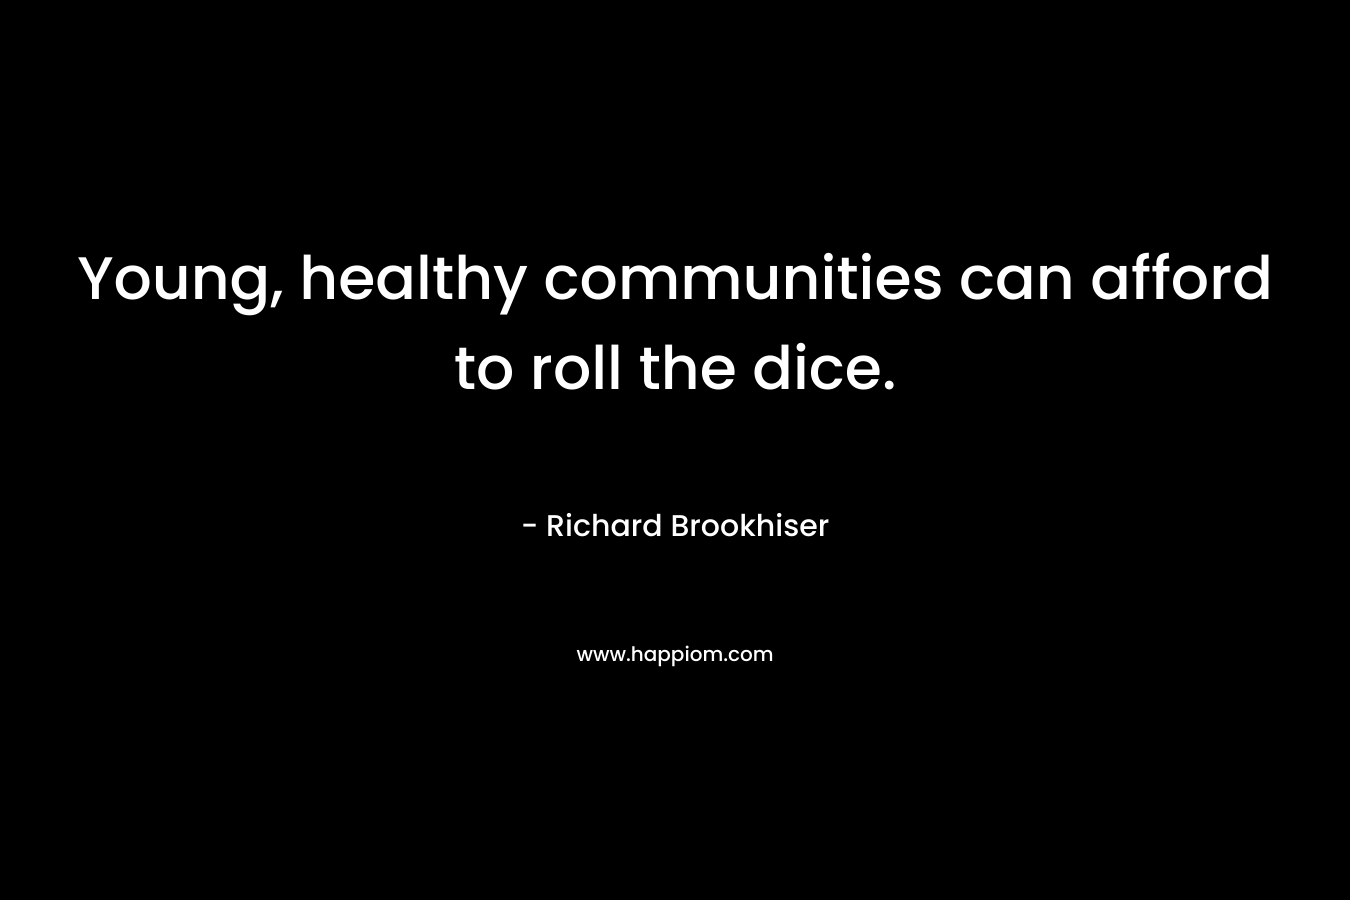 Young, healthy communities can afford to roll the dice. – Richard Brookhiser